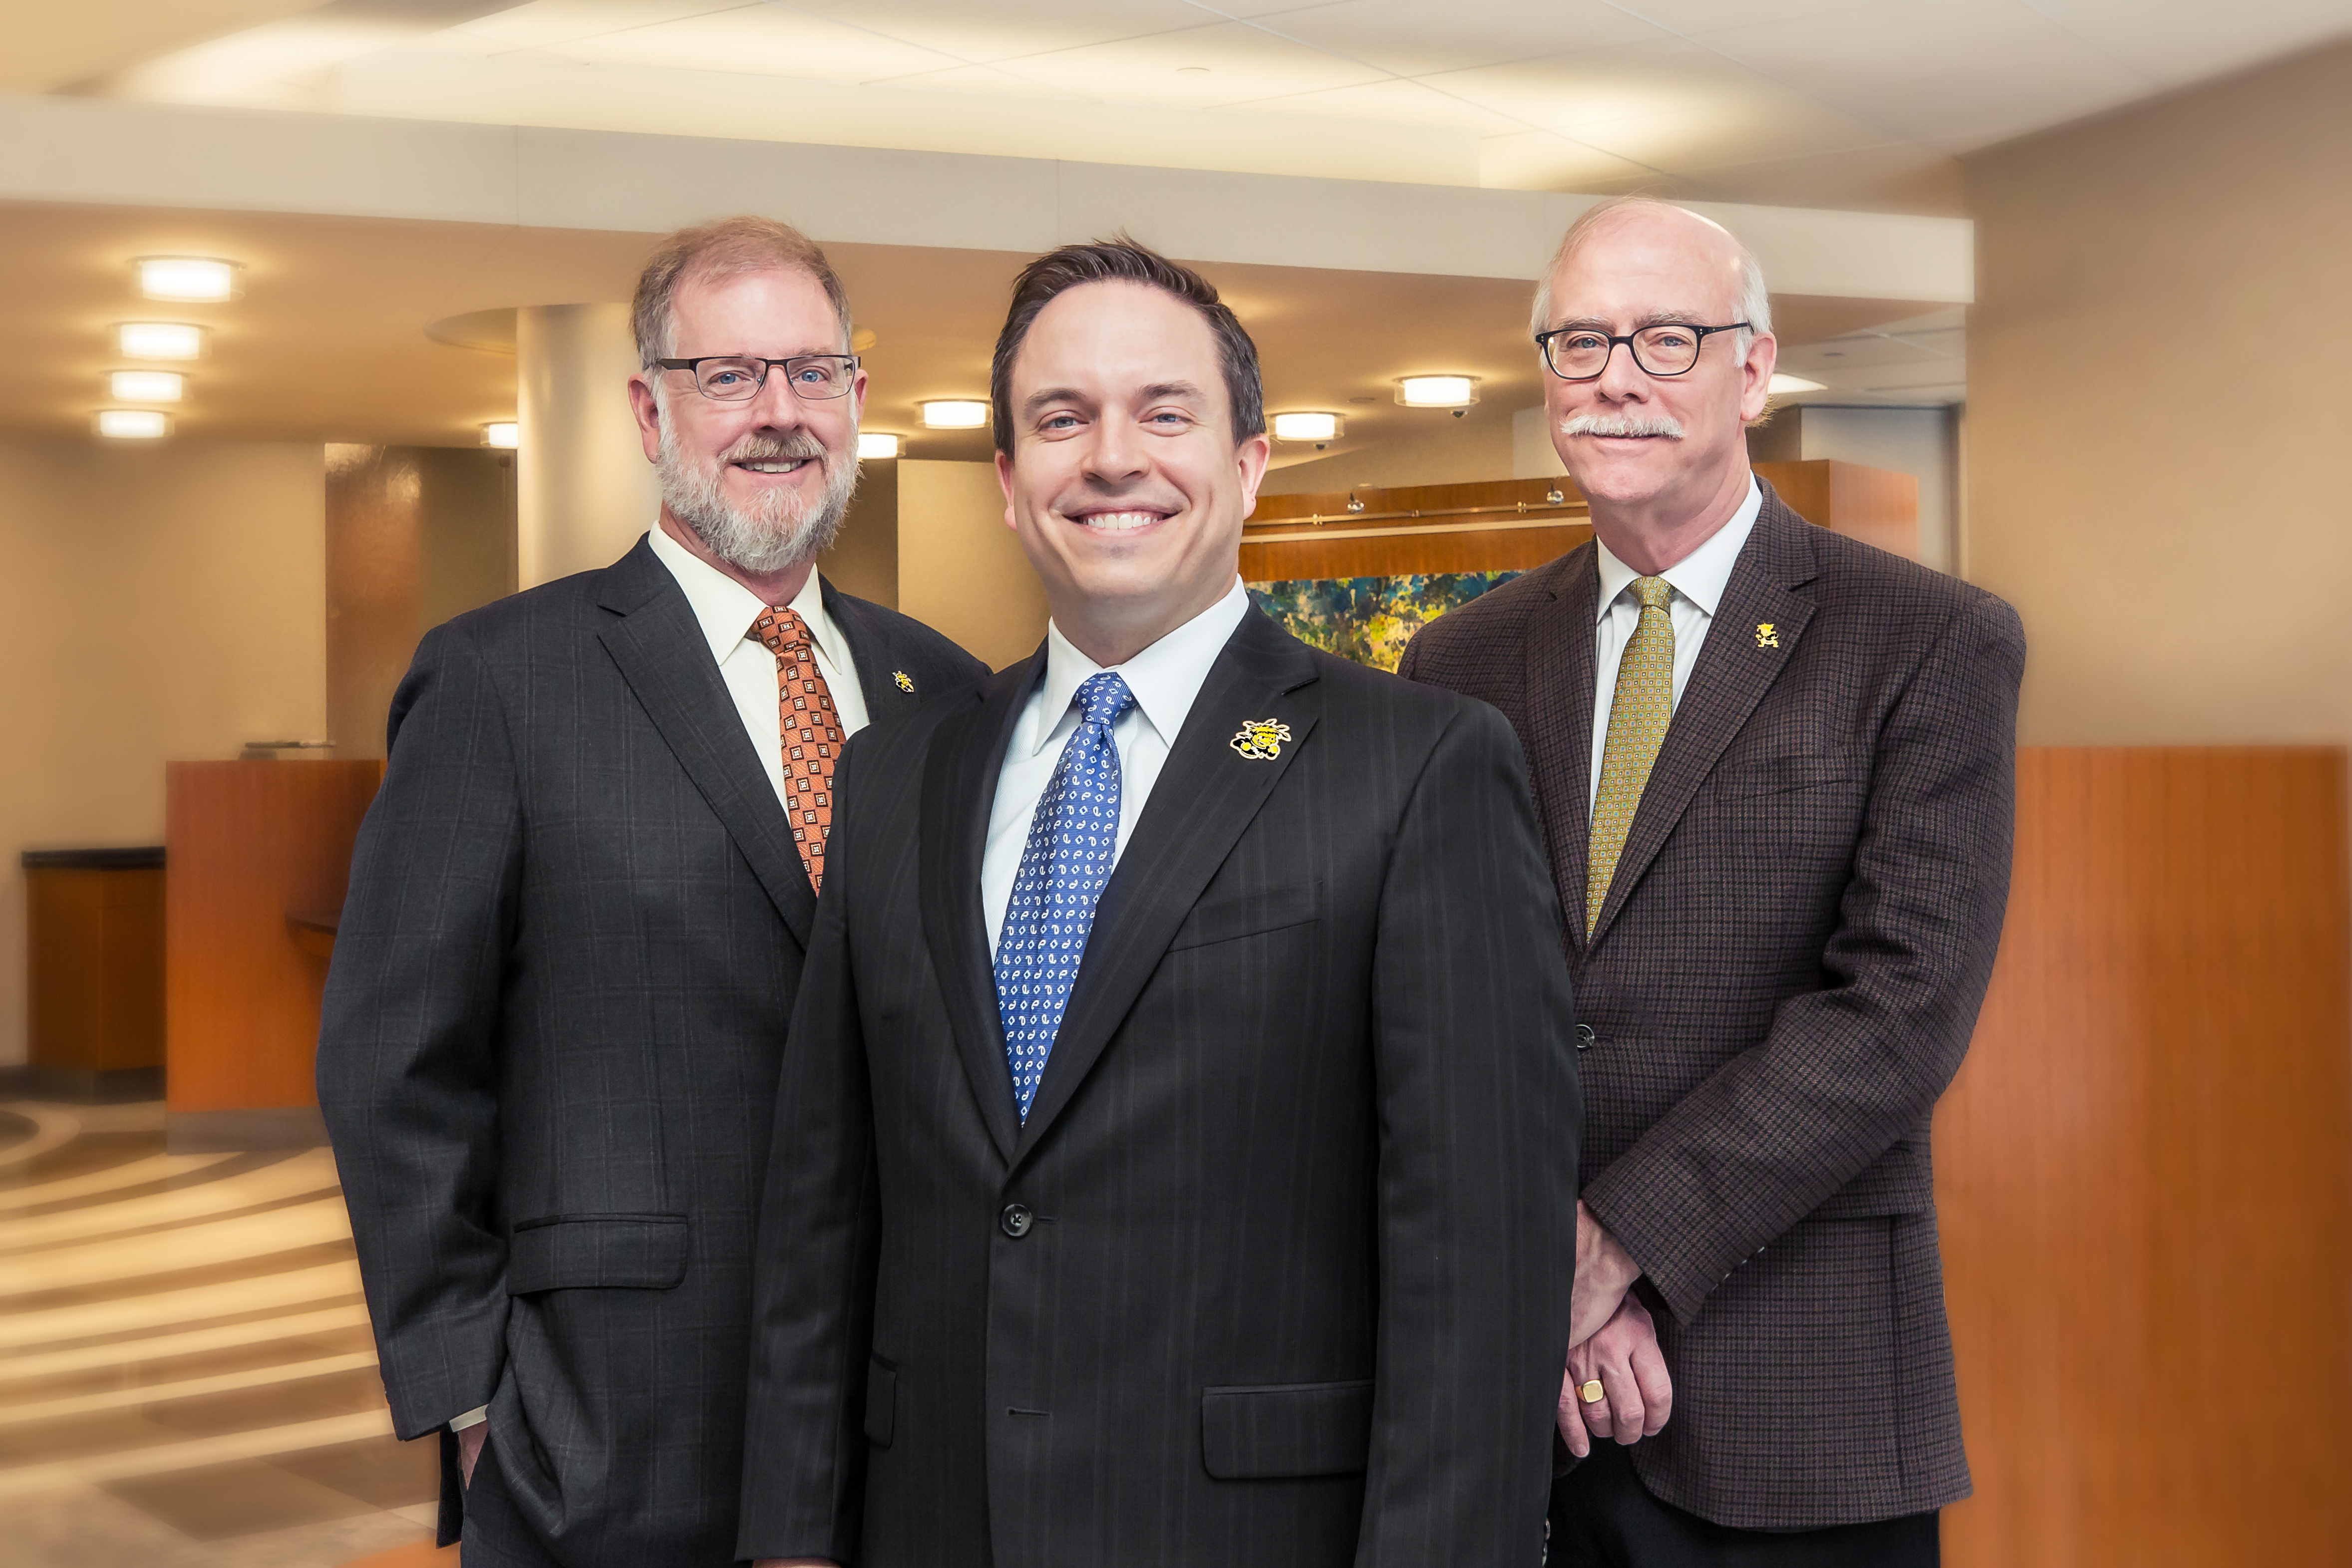 Members of the Bastian family and their family-owned Fidelity Bank have contributed $1 million to Wichita State University to help build a new home for the W. Frank Barton School of Business. From left are Clark Bastian, Aaron Bastian and Clay Bastian.